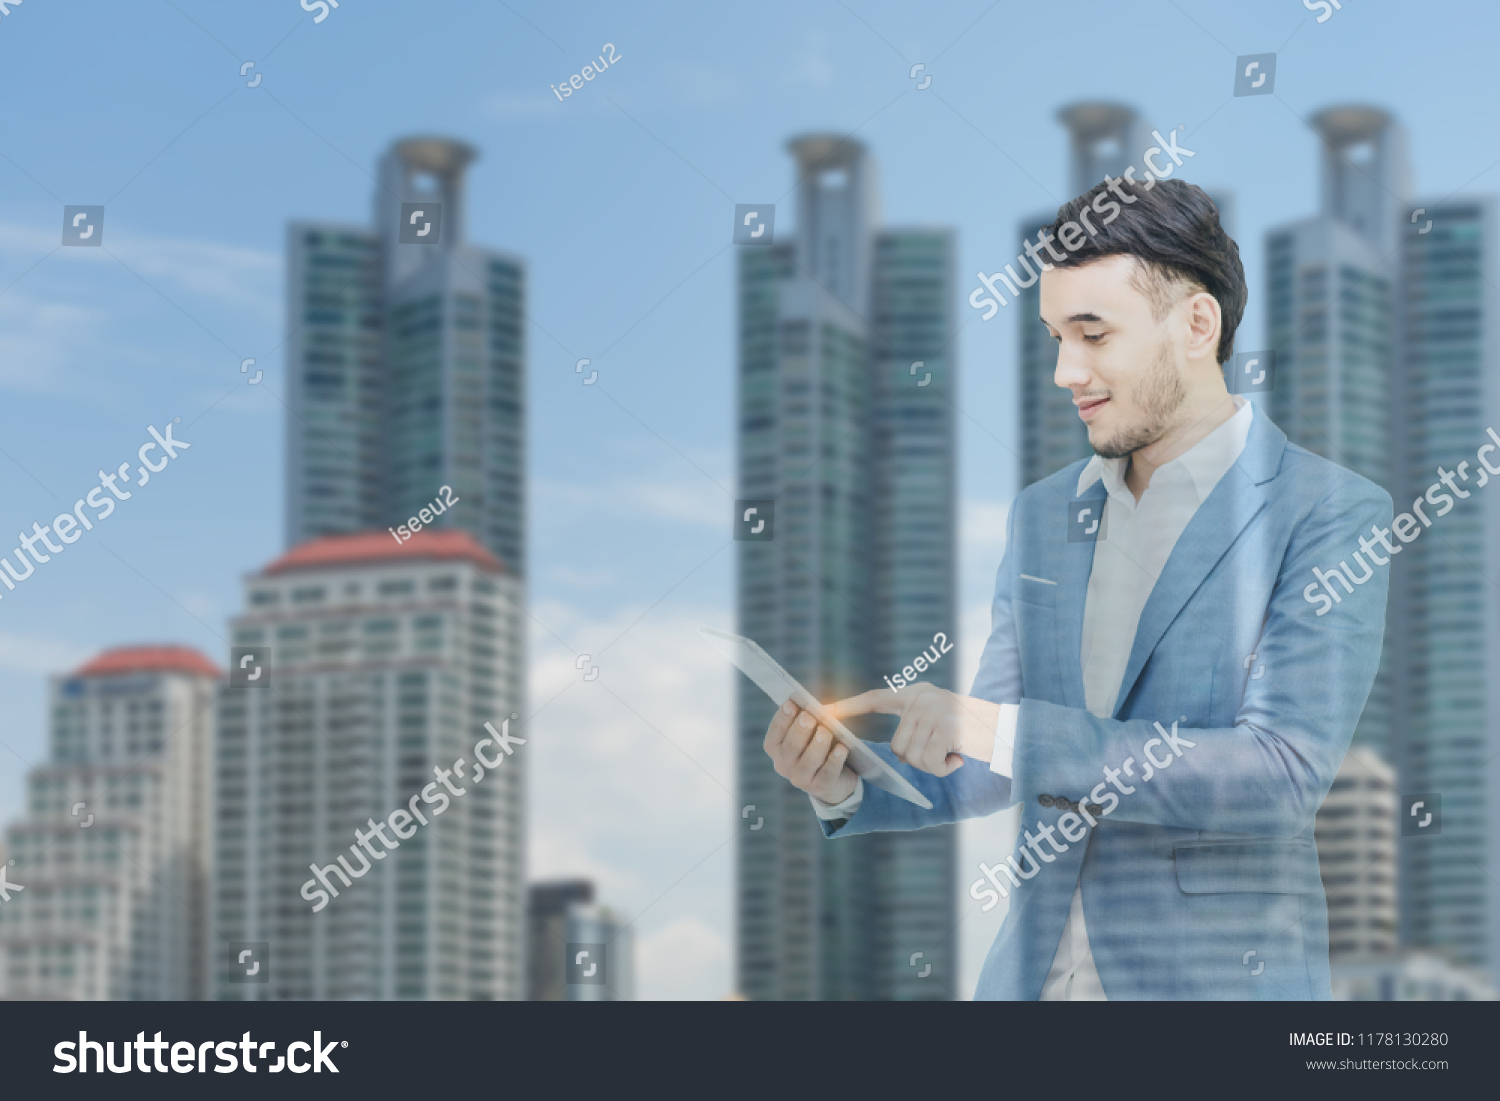 Mix image.Business man holding smartphone in hand with background city view. #1178130280